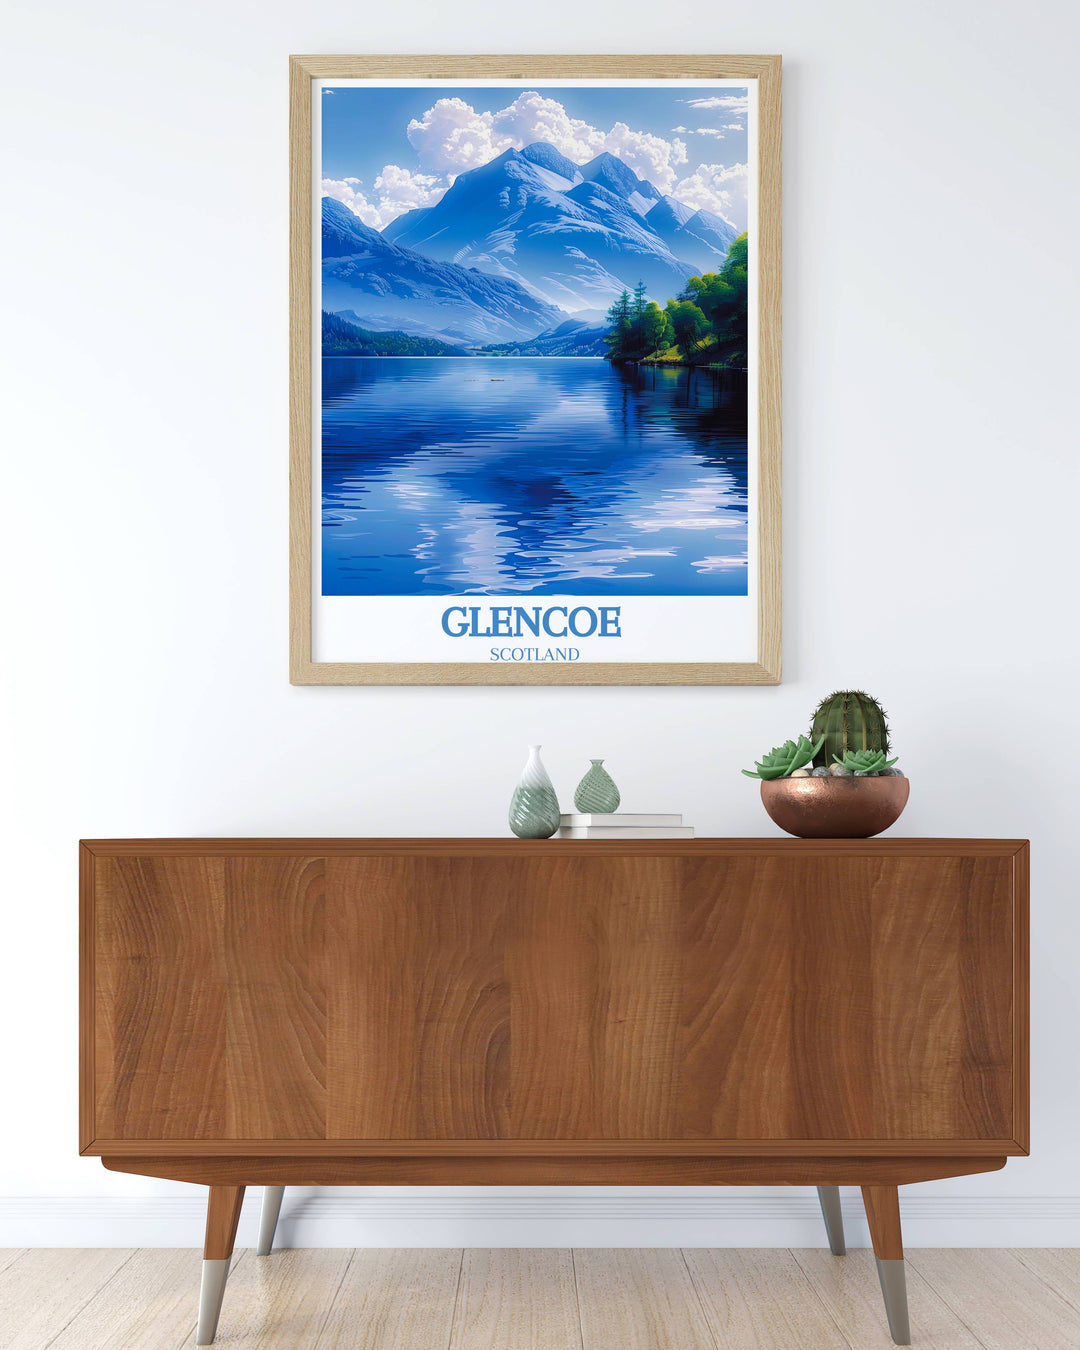 A Glencoe Gift Art piece that stands out in any Europe travel collection, celebrating the rugged charm and timeless mystique of Scotland's landscapes.